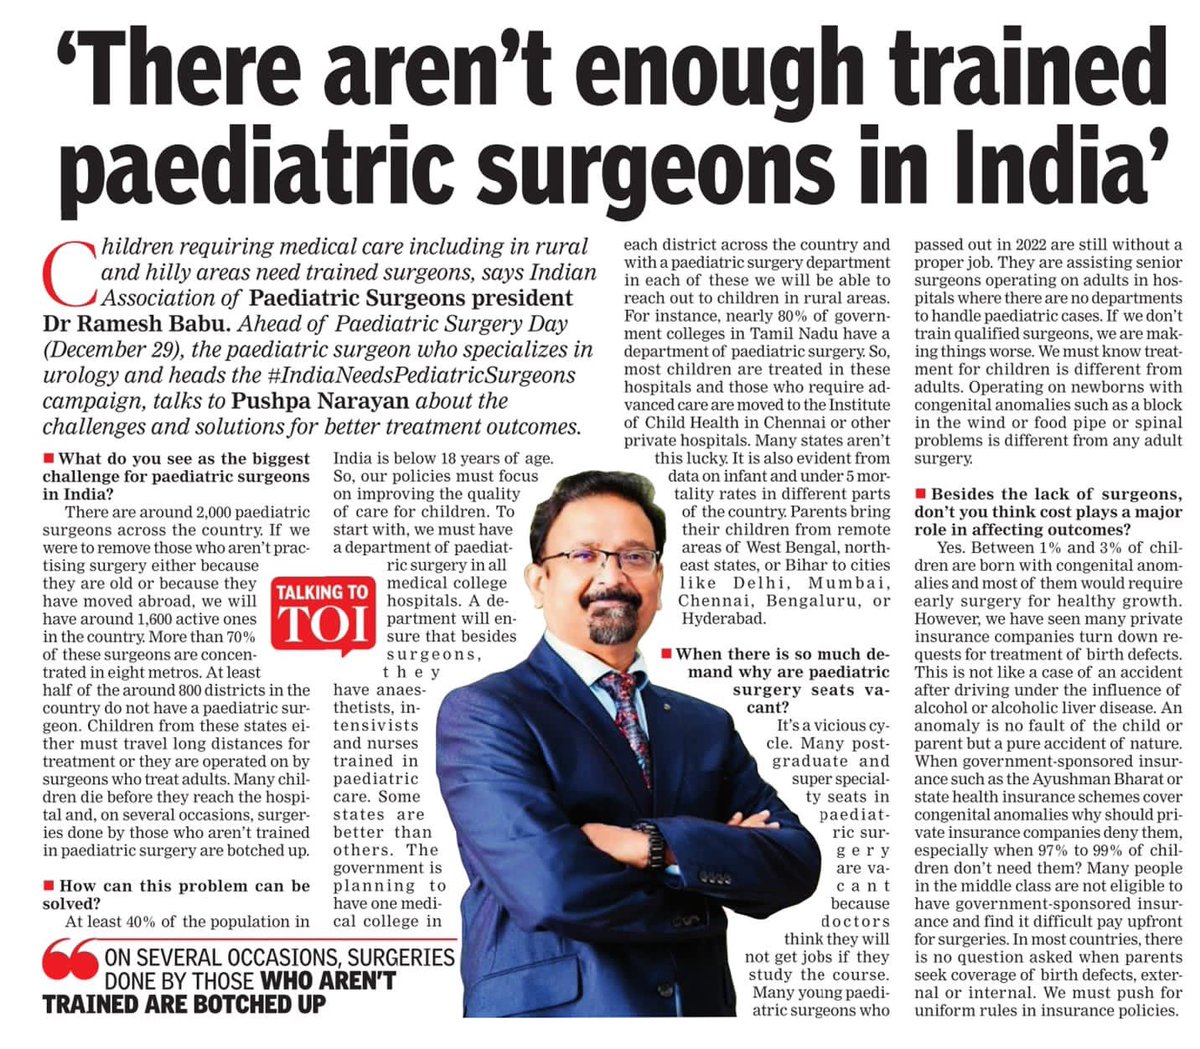 Check out this interview of Dr Ramesh Babu, President, IAPS on why there aren't enough trained paediatric surgeons in India

What do you think is the reason for the same?

🚨 Lack of awareness? Cost of treatment? Role of insurance? 

Comment or QT ✅
#IndiaNeedsPediatricSurgeons